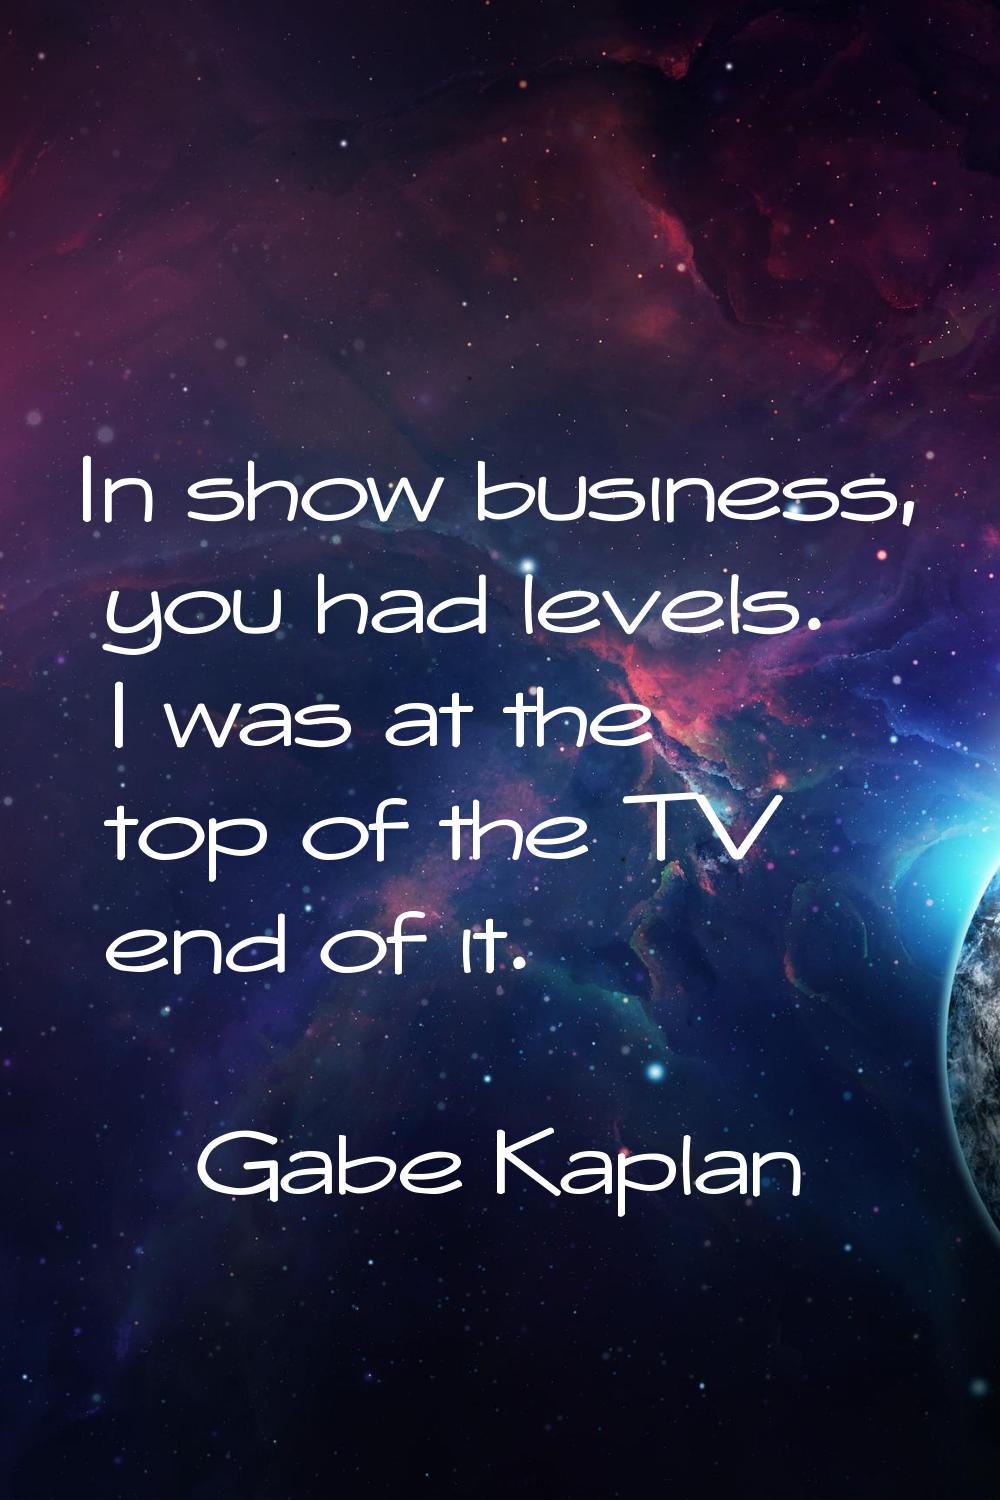 In show business, you had levels. I was at the top of the TV end of it.